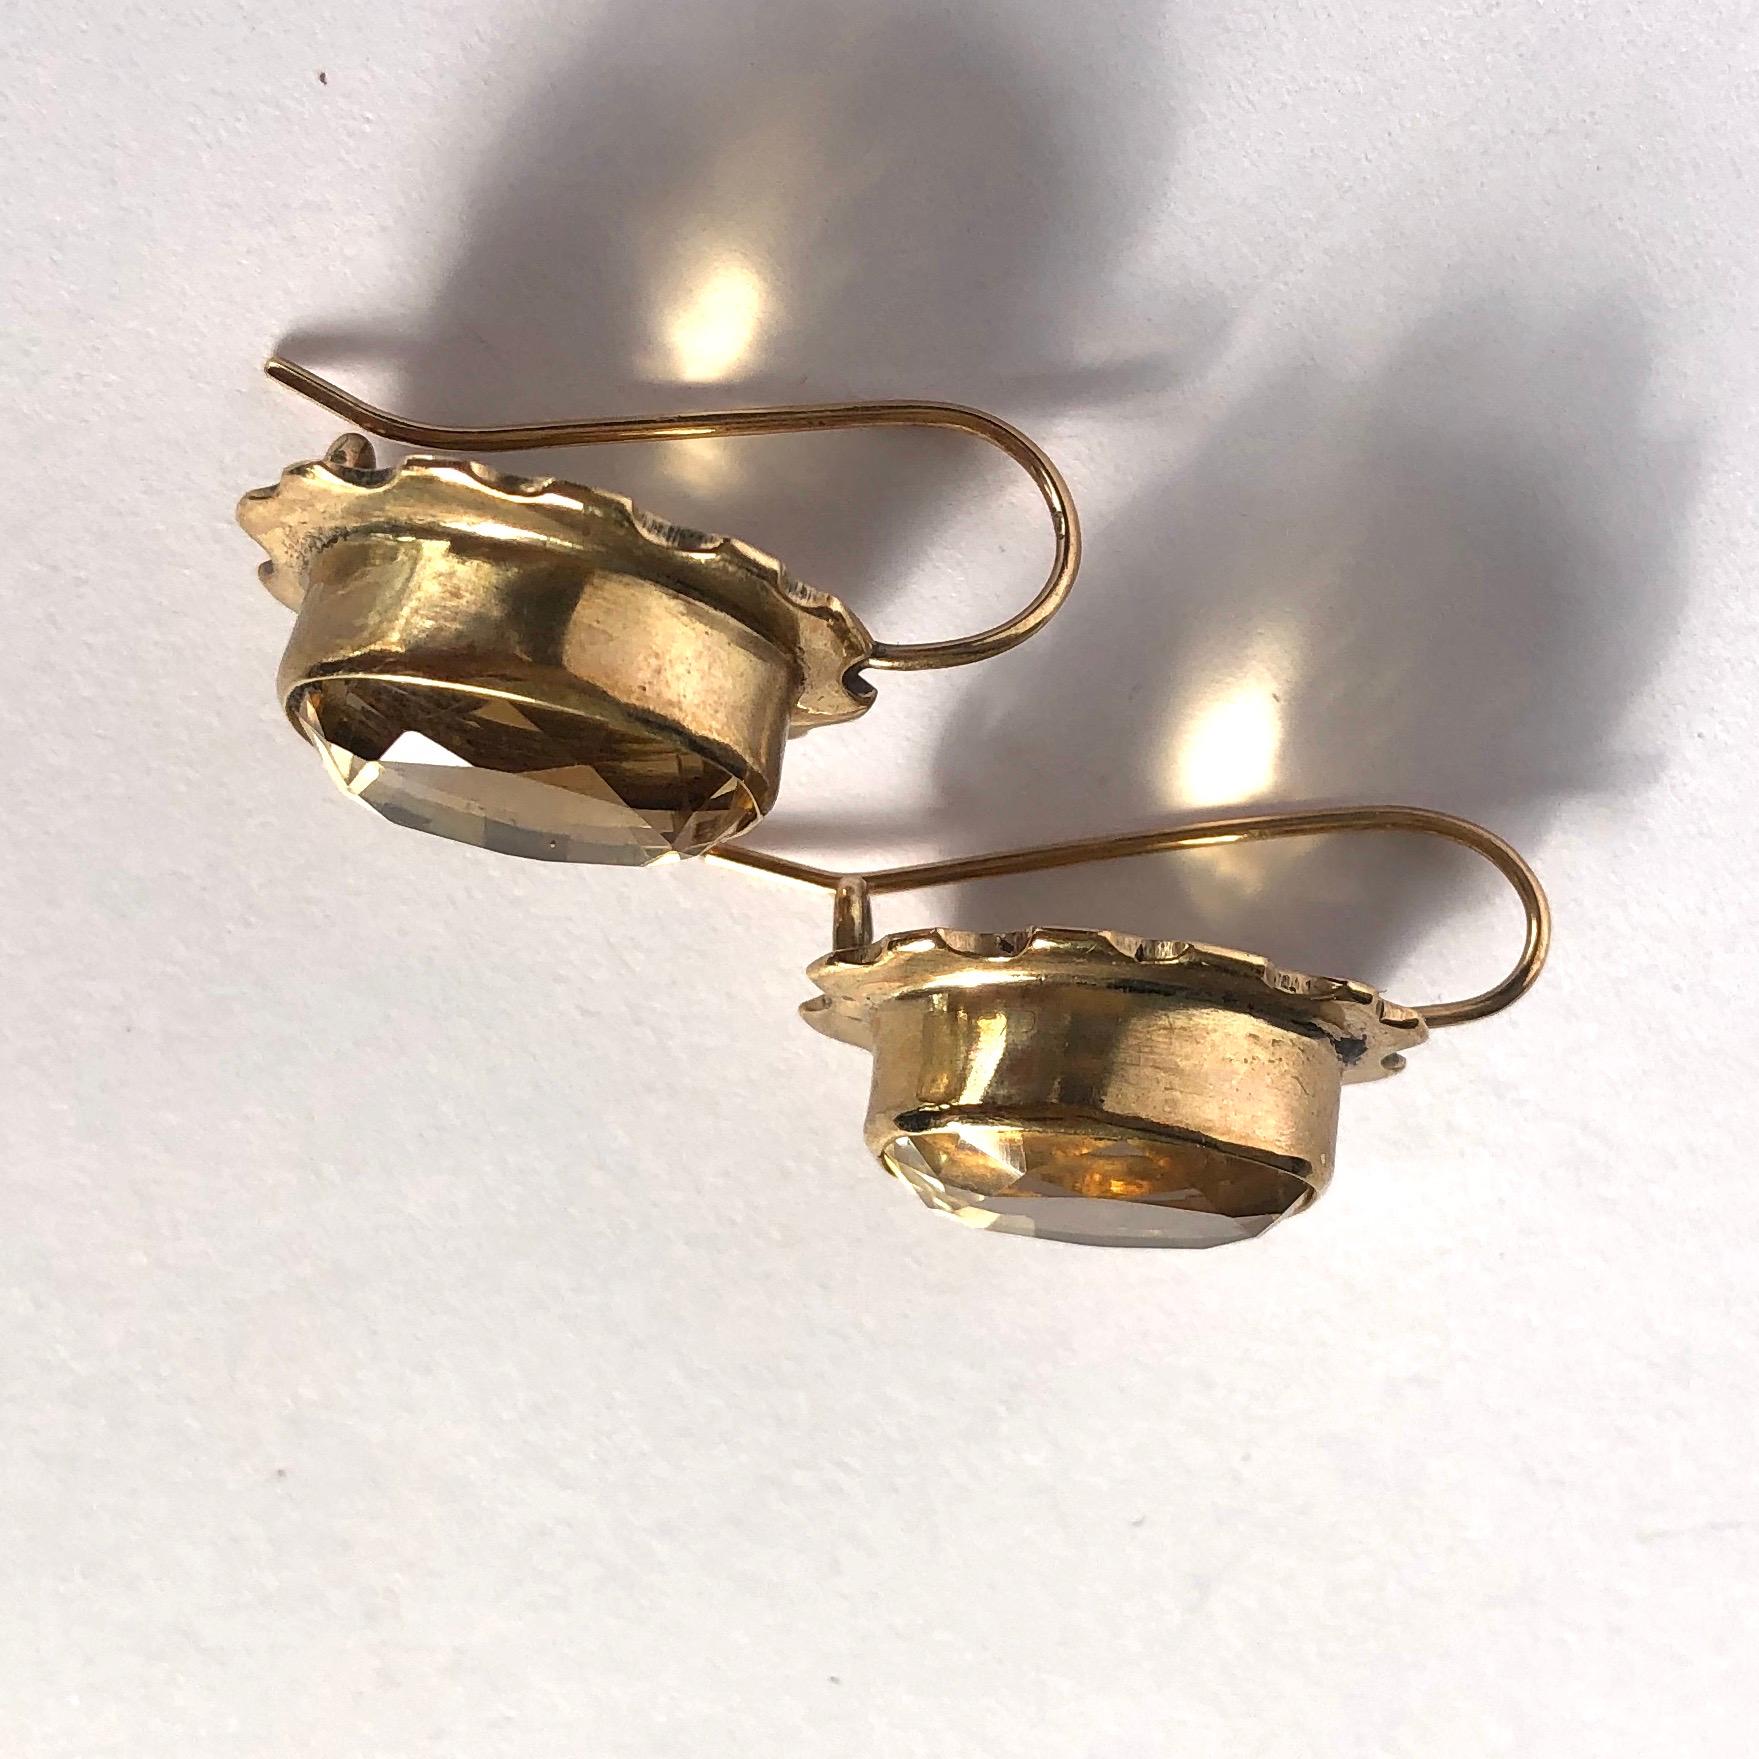 Oval Cut Edwardian Citrine and 9 Carat Gold Earrings